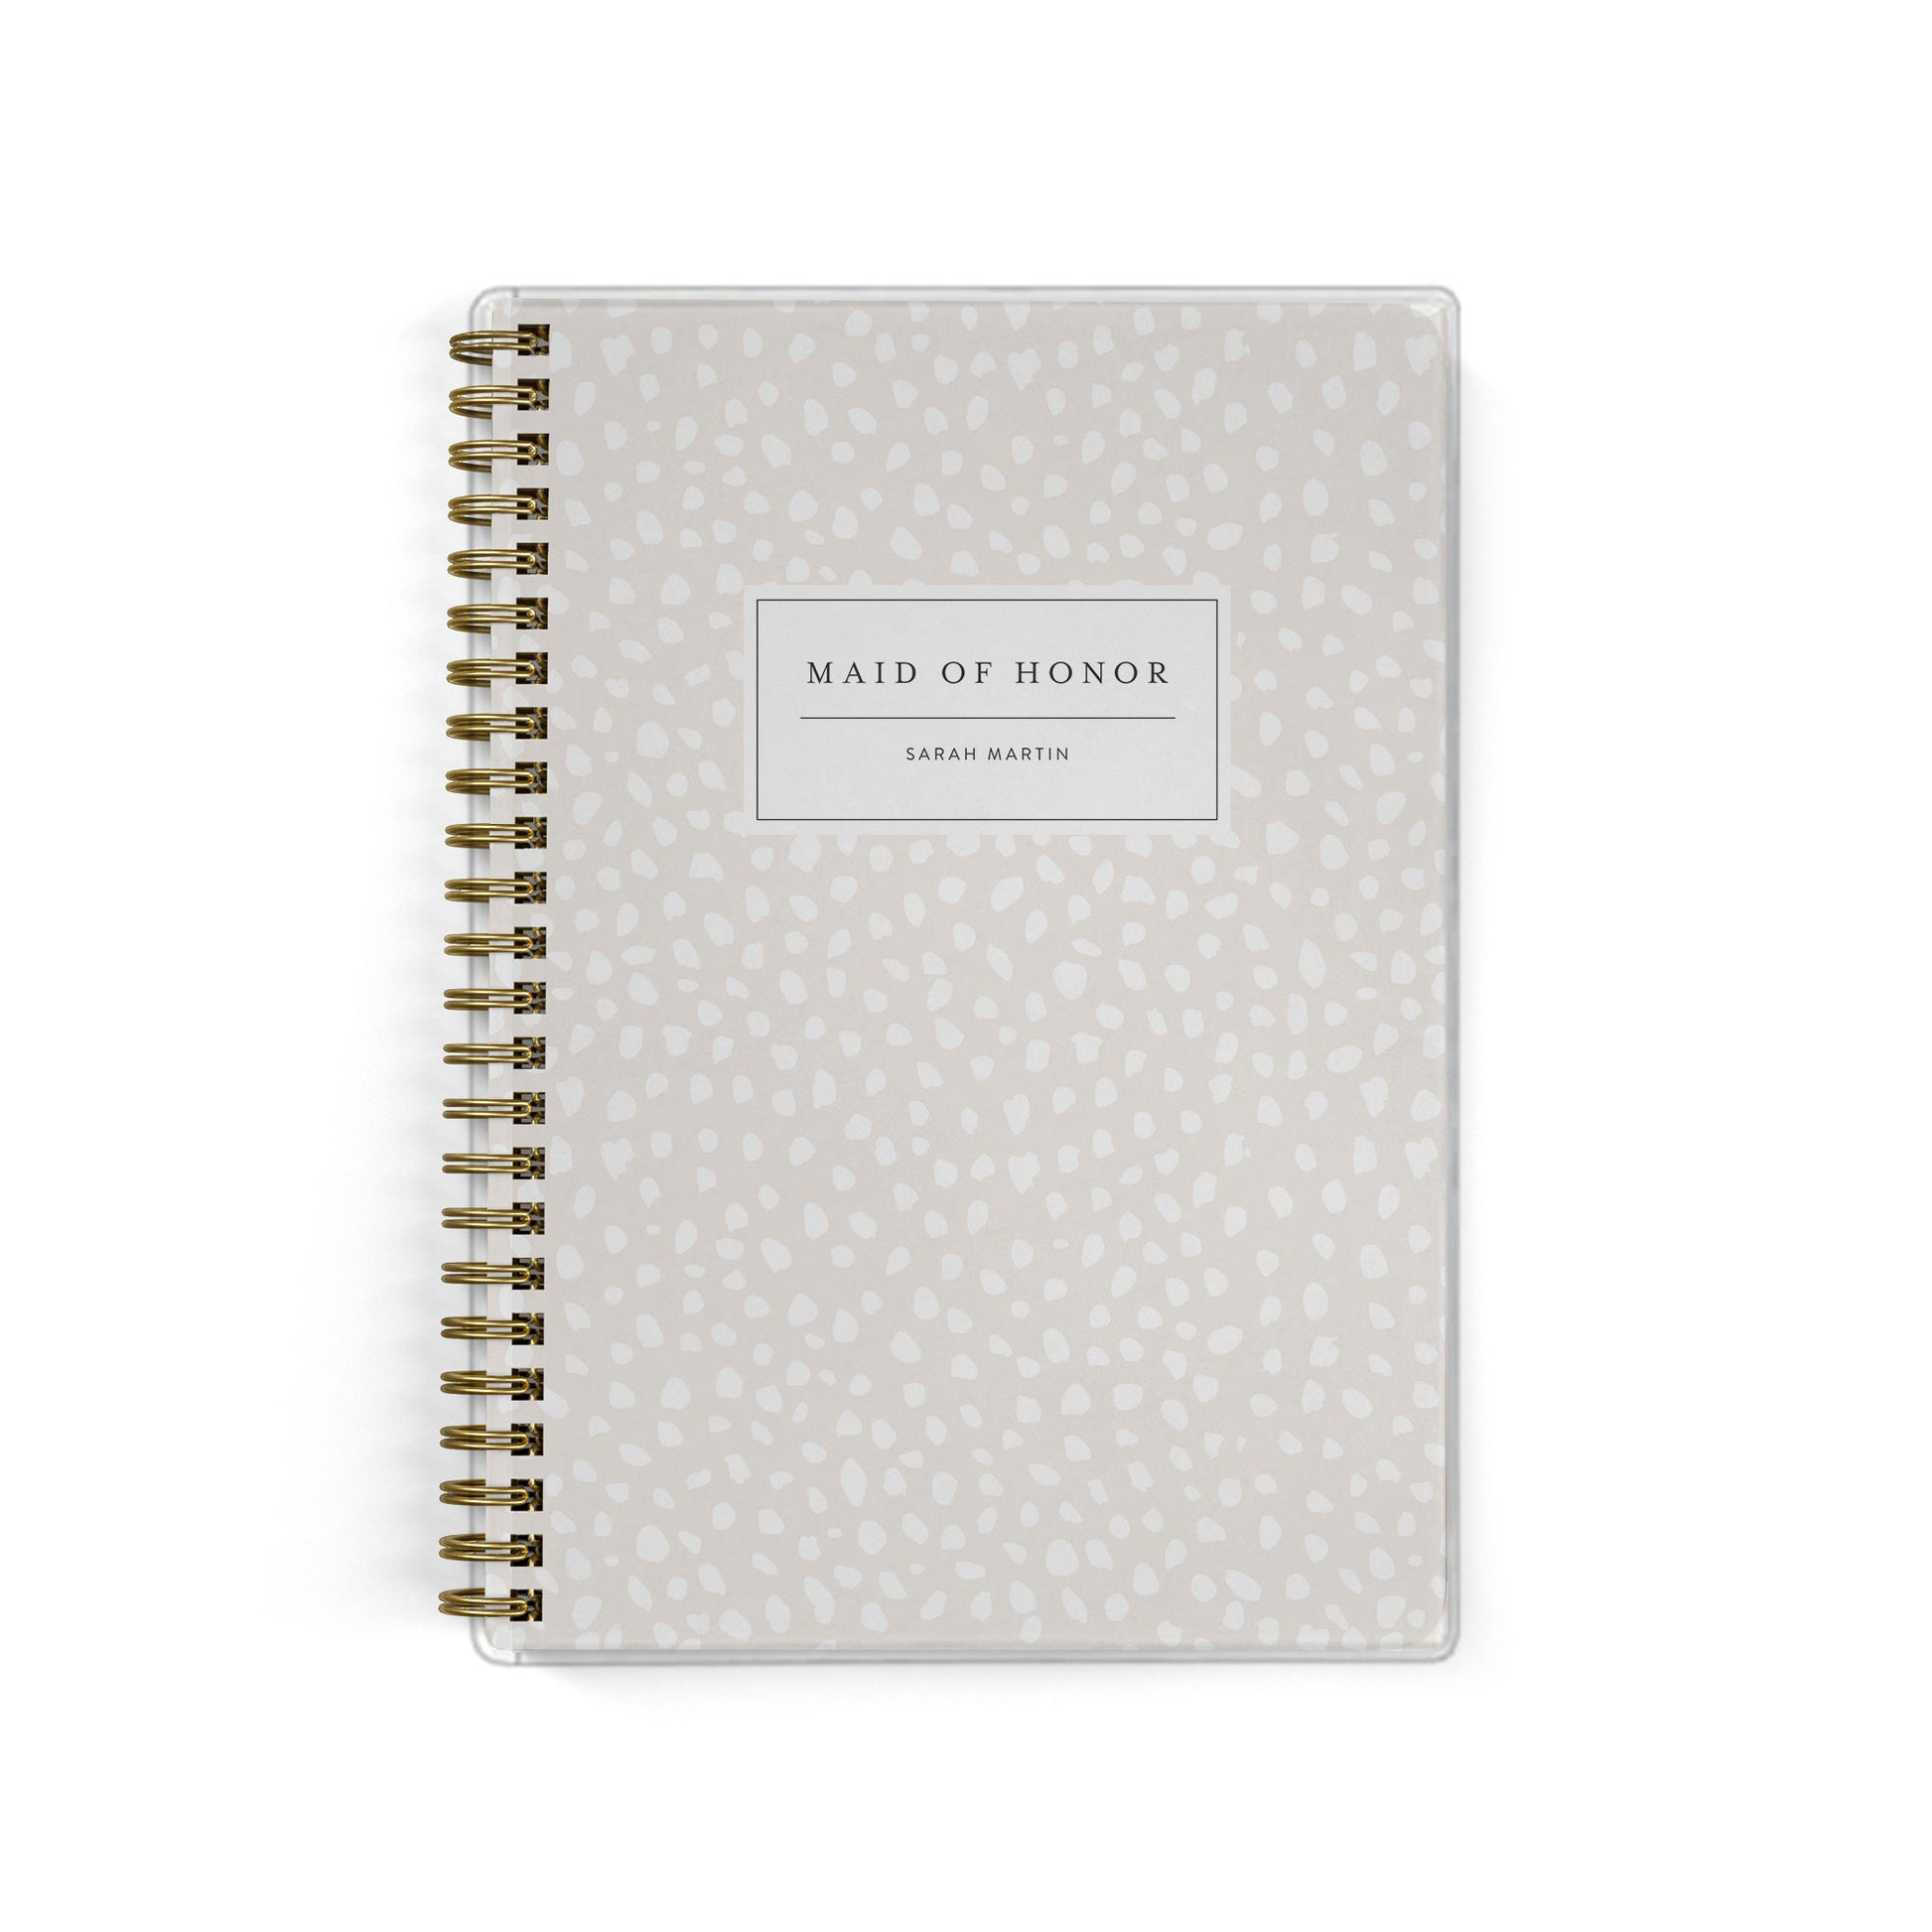 Our exclusive maid of honor planners are the perfect gift for your best friend, shown in a spotted dot design